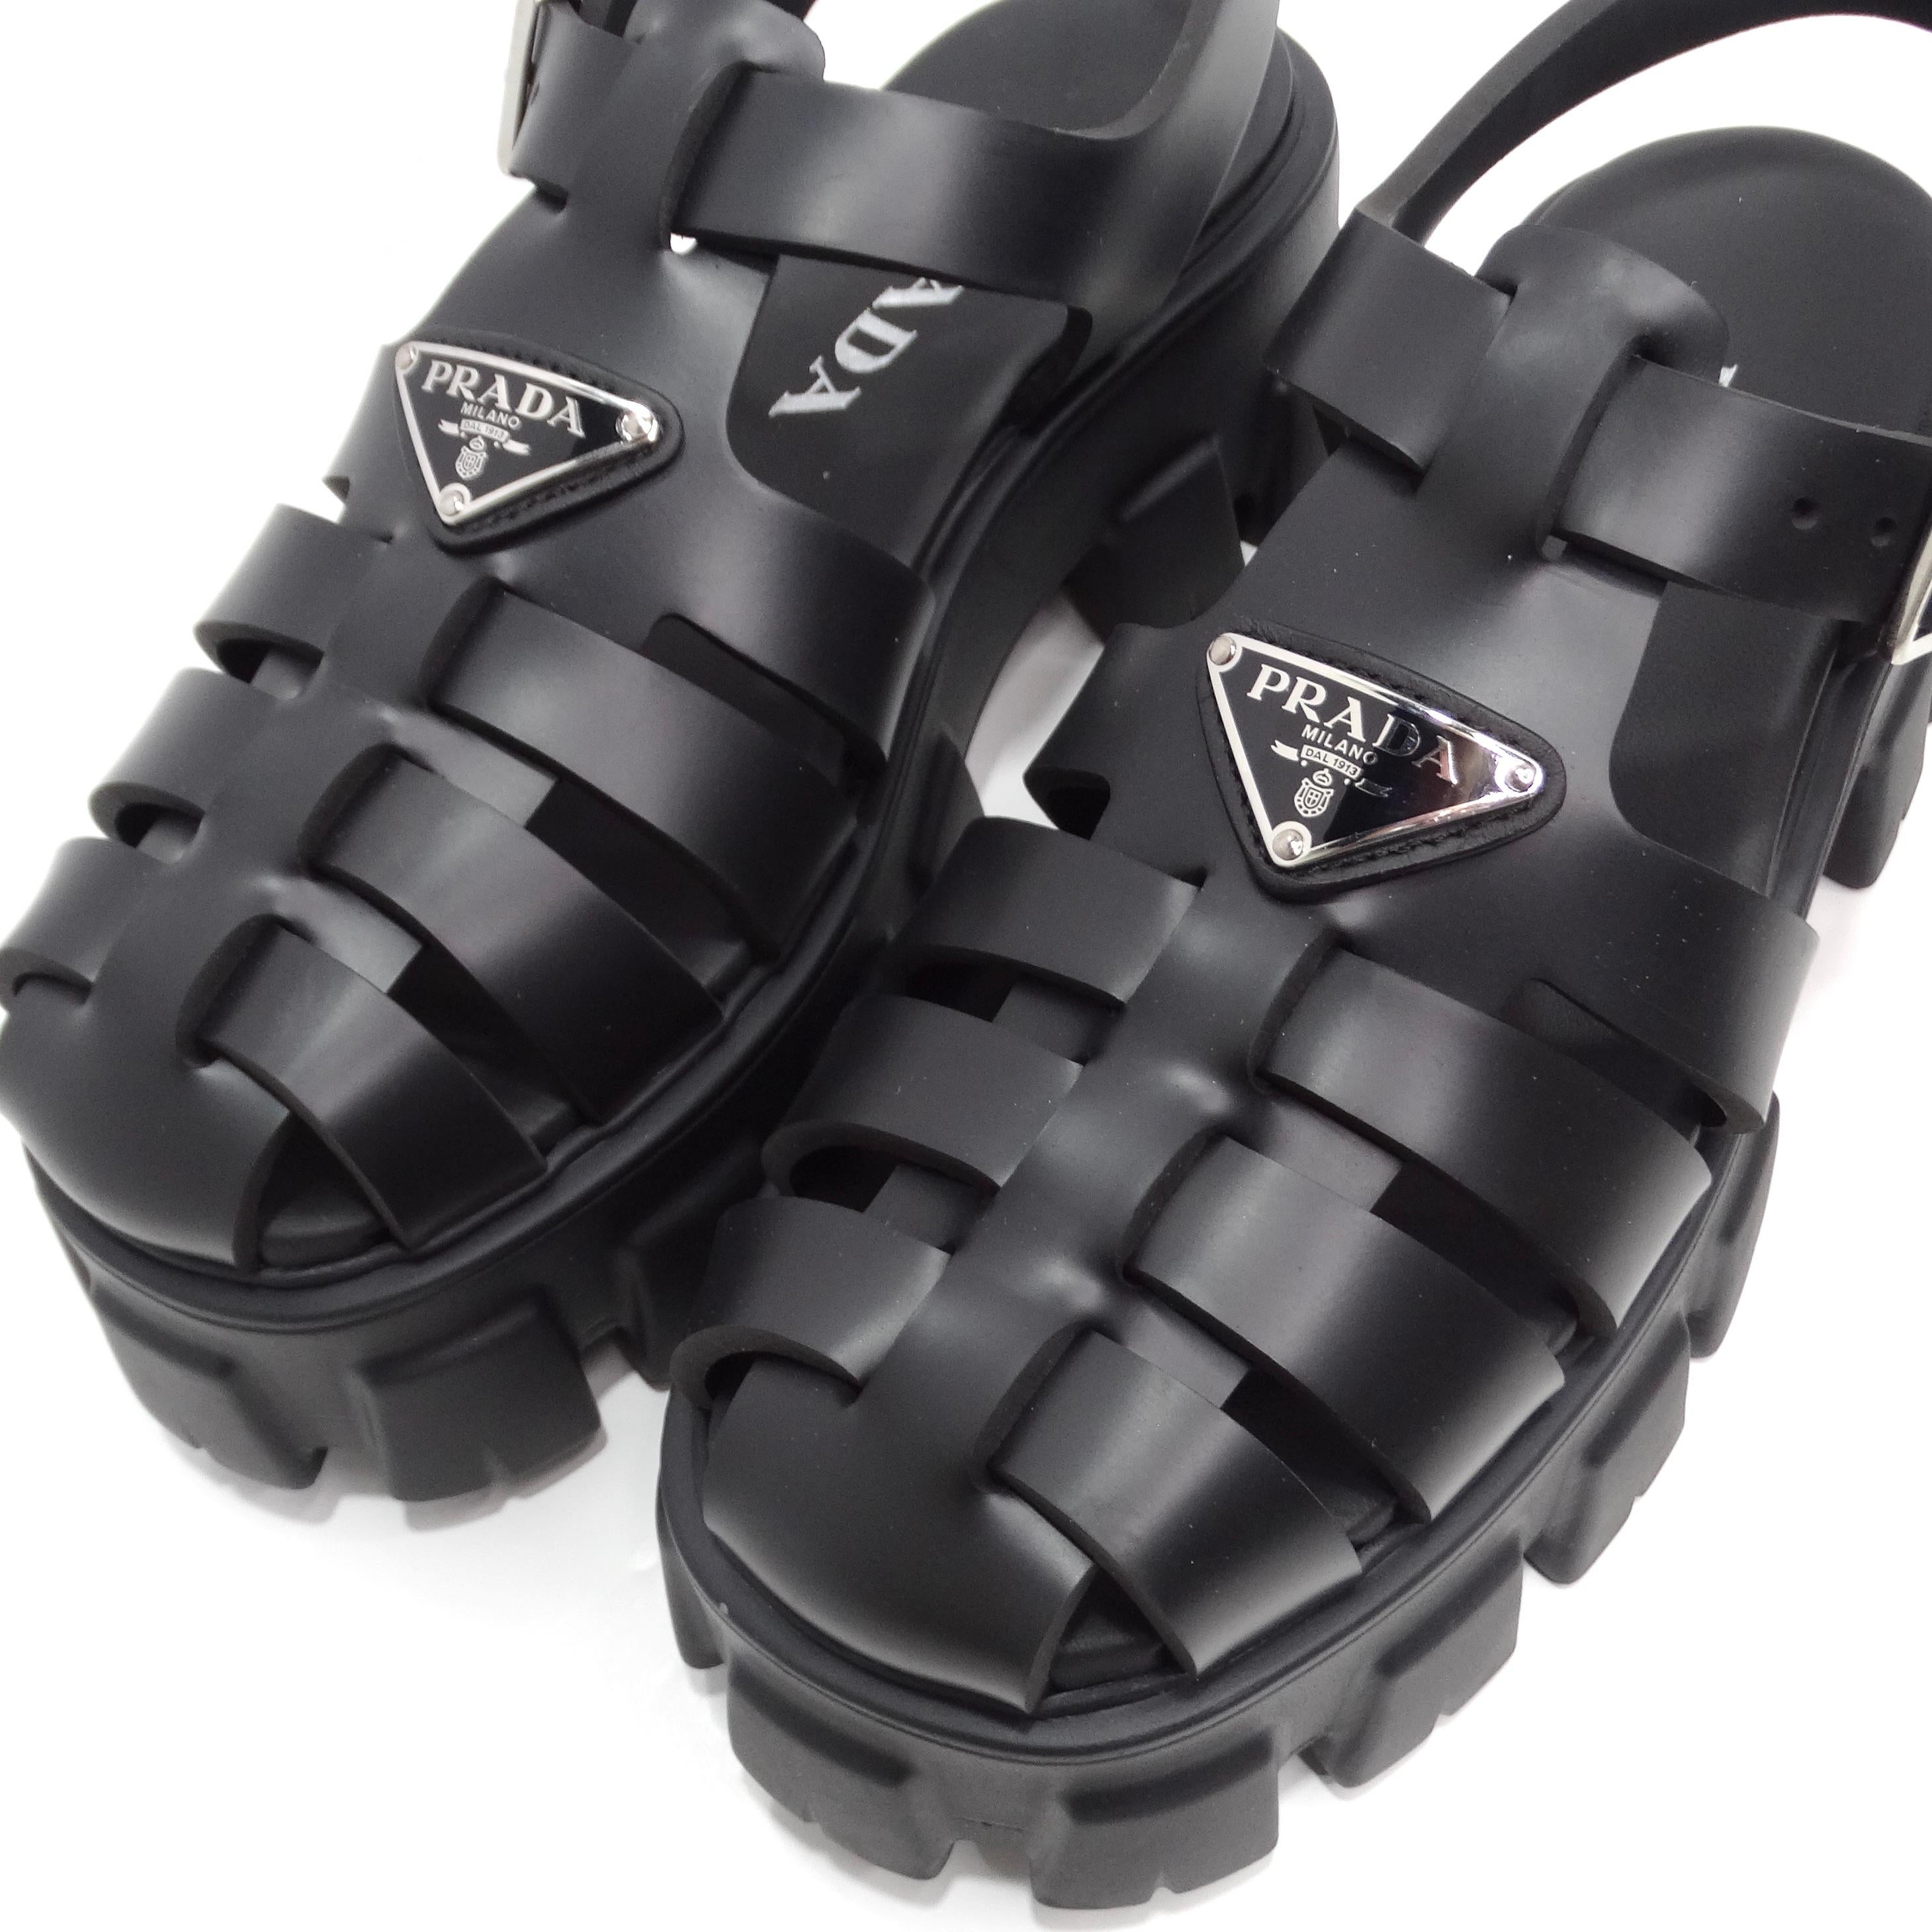 The Prada Black Rubber Caged Slingback Platform Sandals are a bold and contemporary take on retro beach footwear, combining style with functionality. These platform sandals feature a chunky yet lightweight Monolith sole that provides both comfort